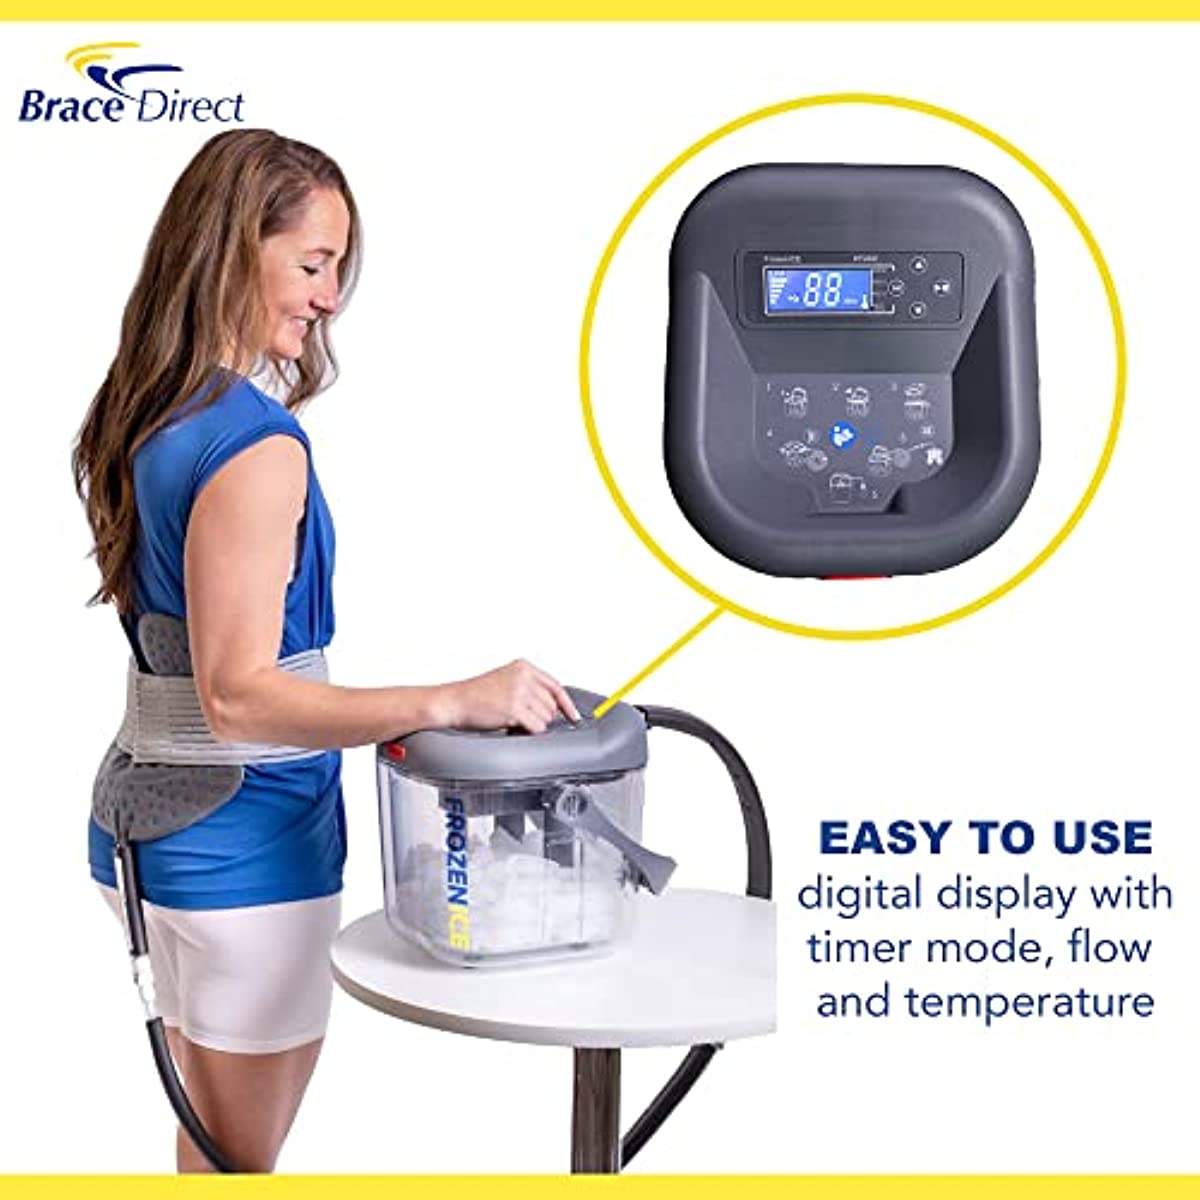 Frozen Ice Circulation Therapy Machine - Shoulder, Knee, Ankle, and Back Pain Post Surgery, Cryotherapy for Joint Pain, Sore Muscles, Post Workout Tendonitis and Inflammation by Brace Direct